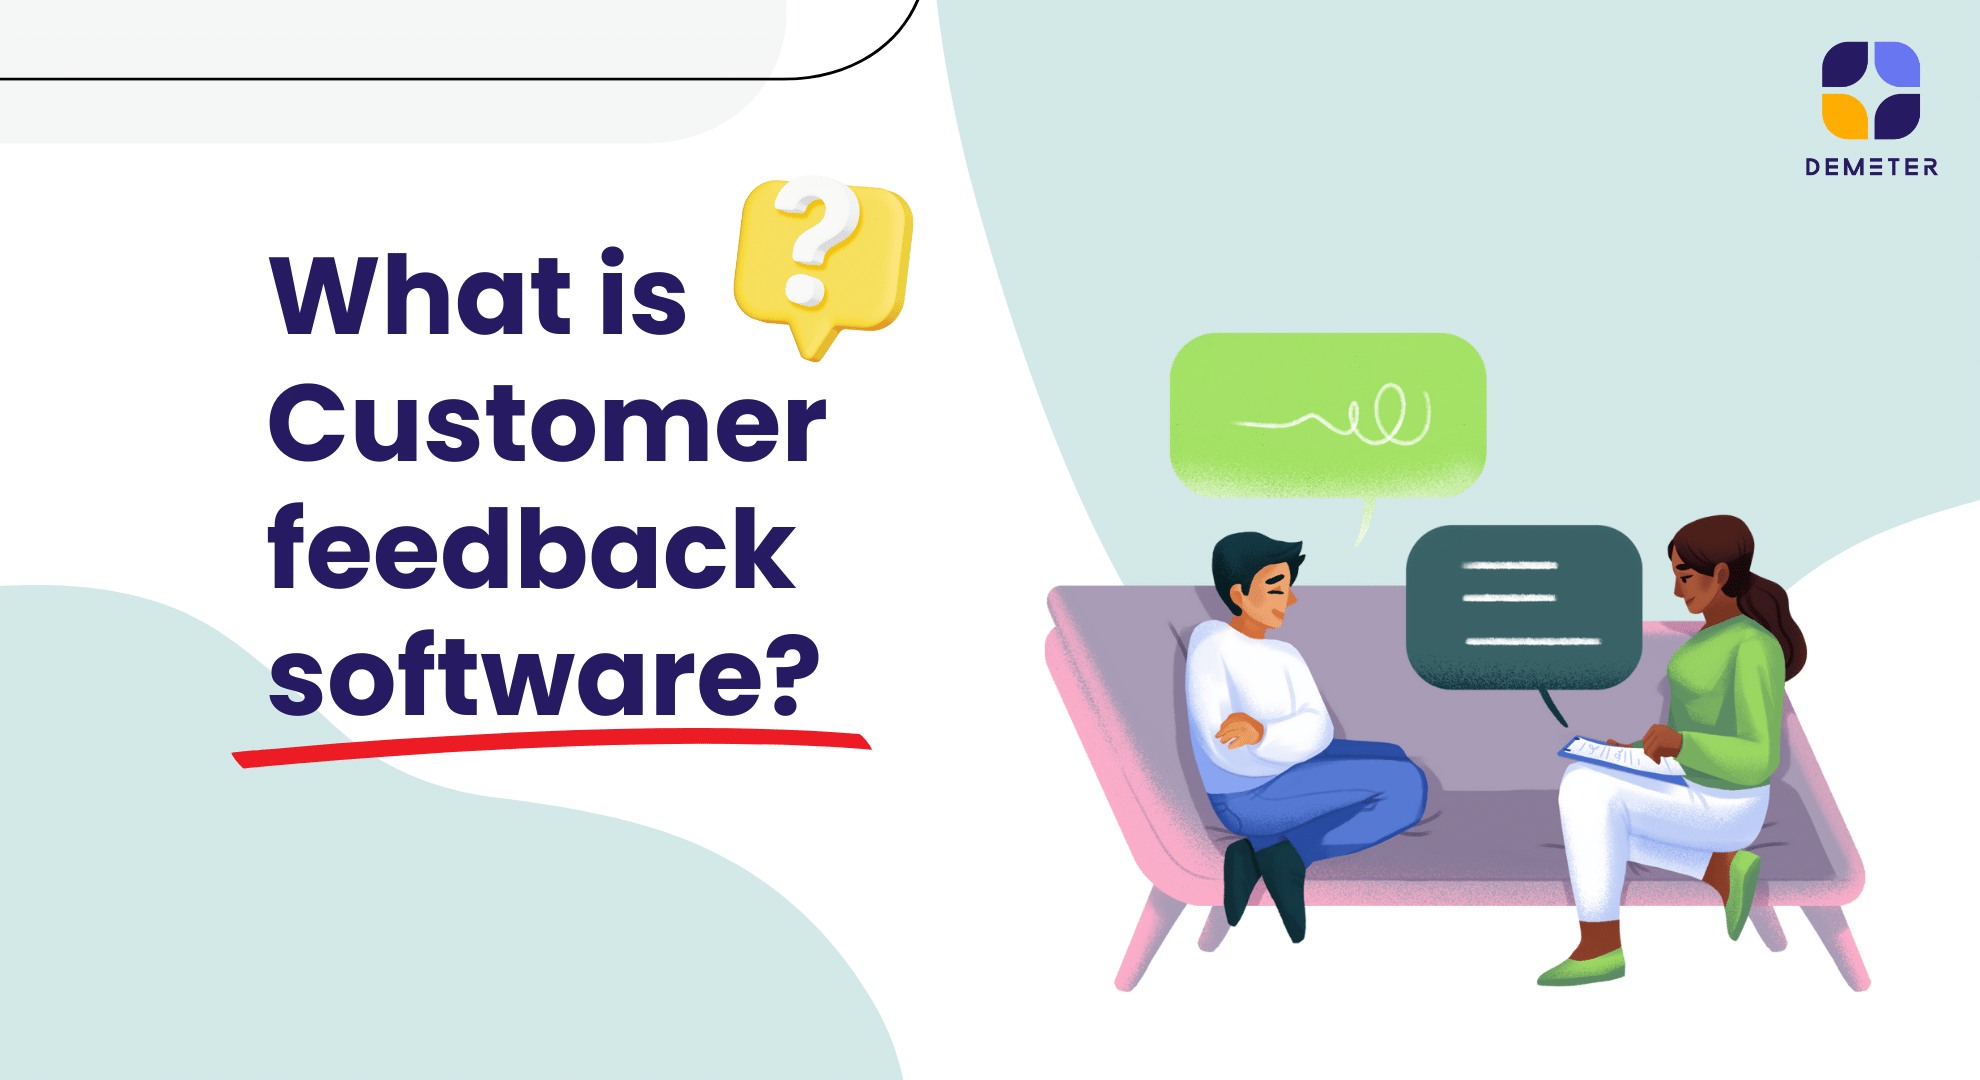 What is customer feedback software